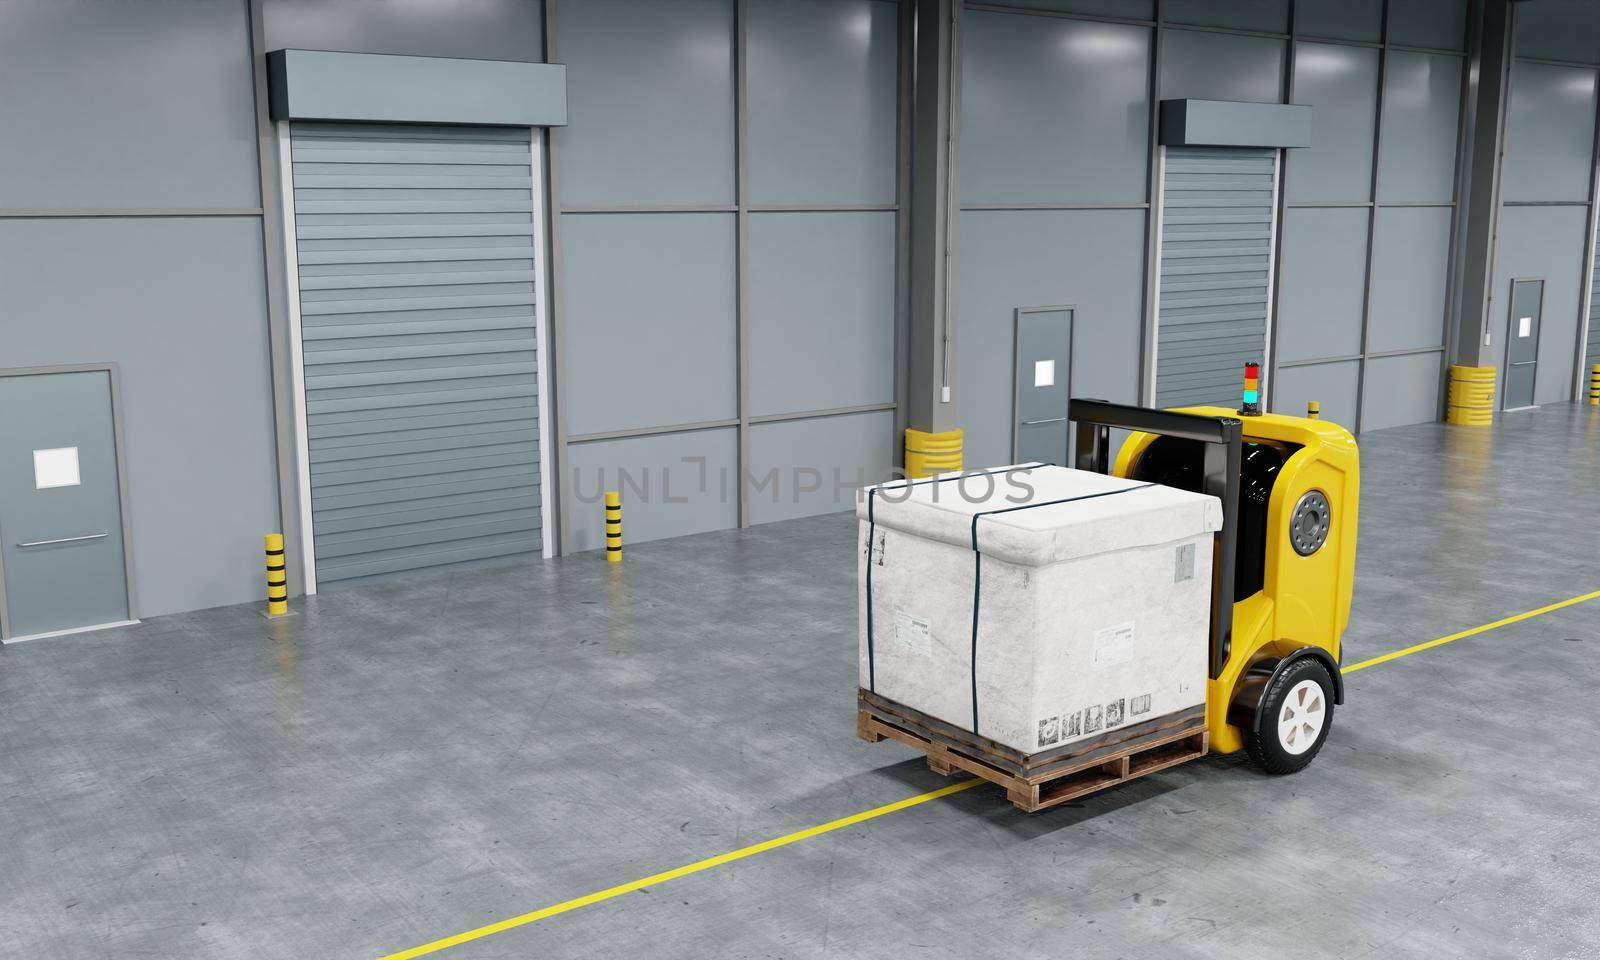 Driverless robotics car forklift robot lifting and moving pallets cardboard box to storage room in the factory background. Business industrial and production concept. and a 3D illustration rendering